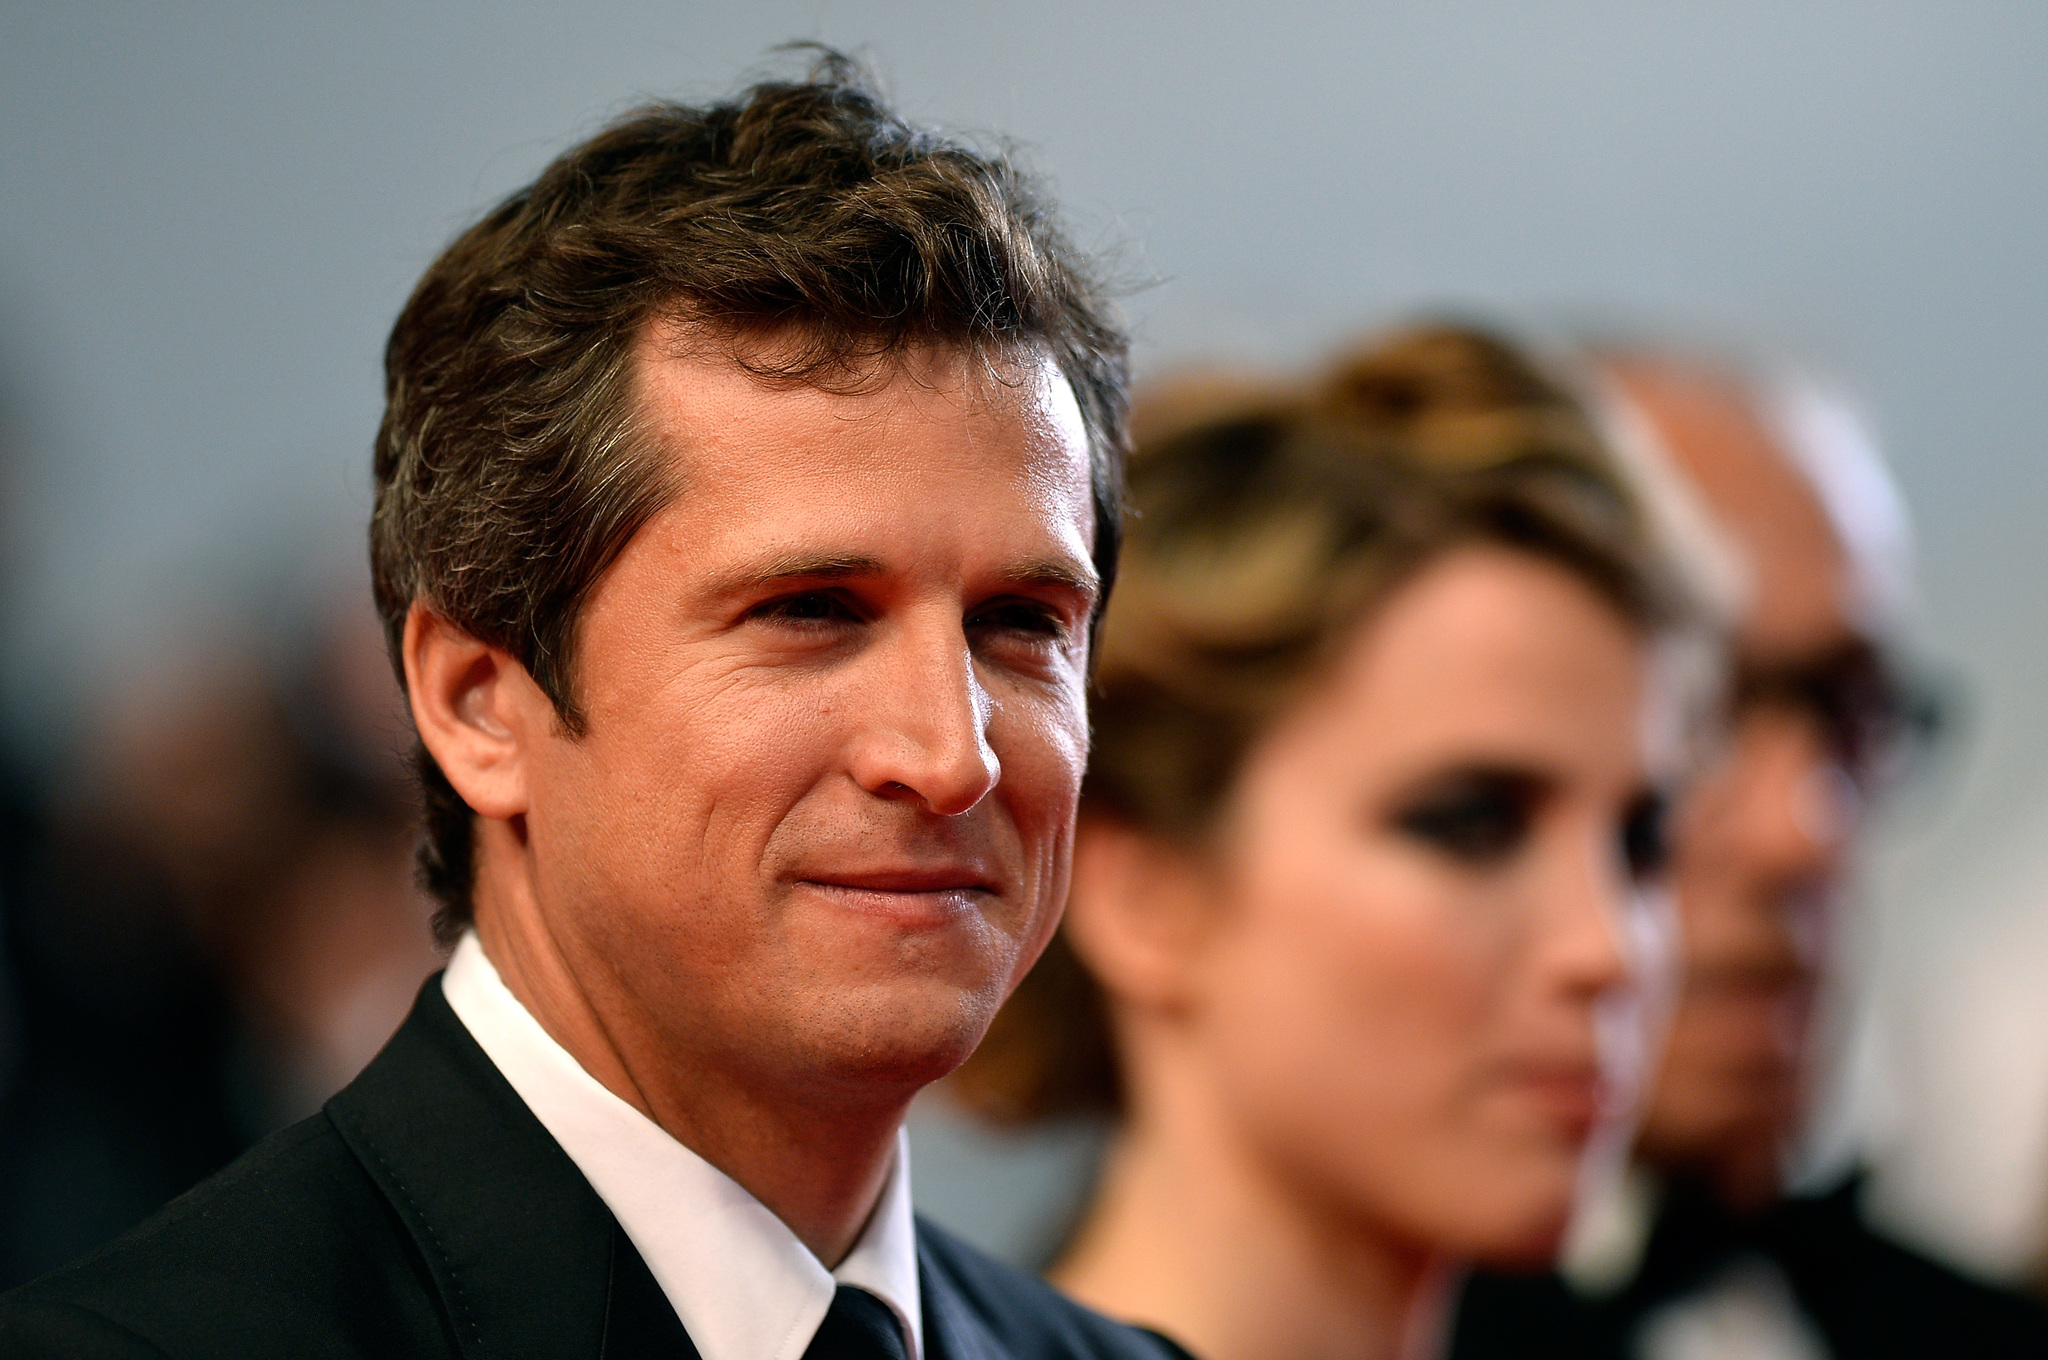 Guillaume Canet and Adèle Haenel at event of L'homme qu'on aimait trop (2014)